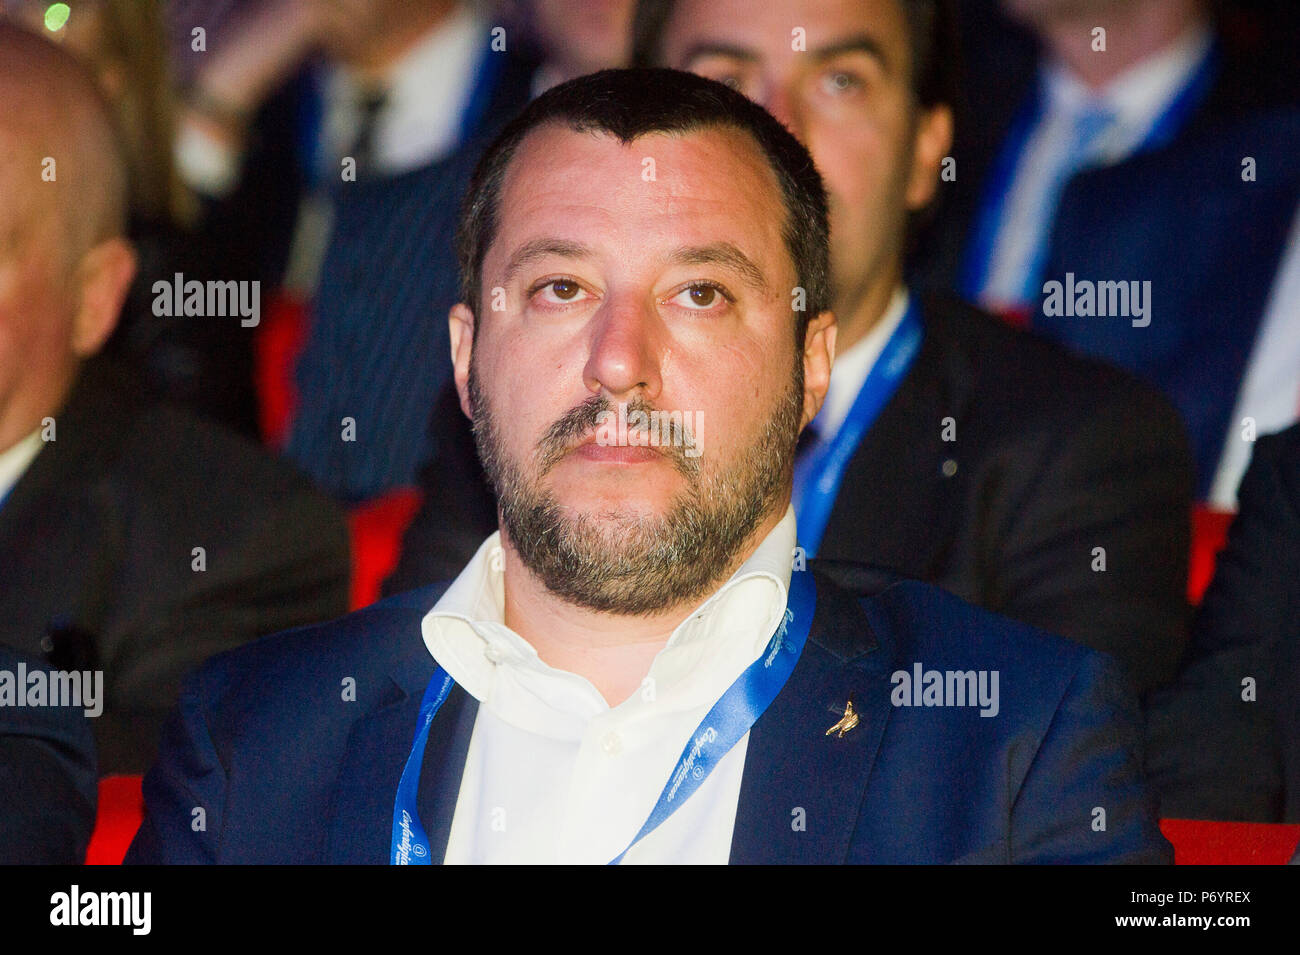 Italy, Rome, Matteo Salvini leader of the Lega Nord vice-president of the Council and Minister of the Interior of the Conte Government. Stock Photo